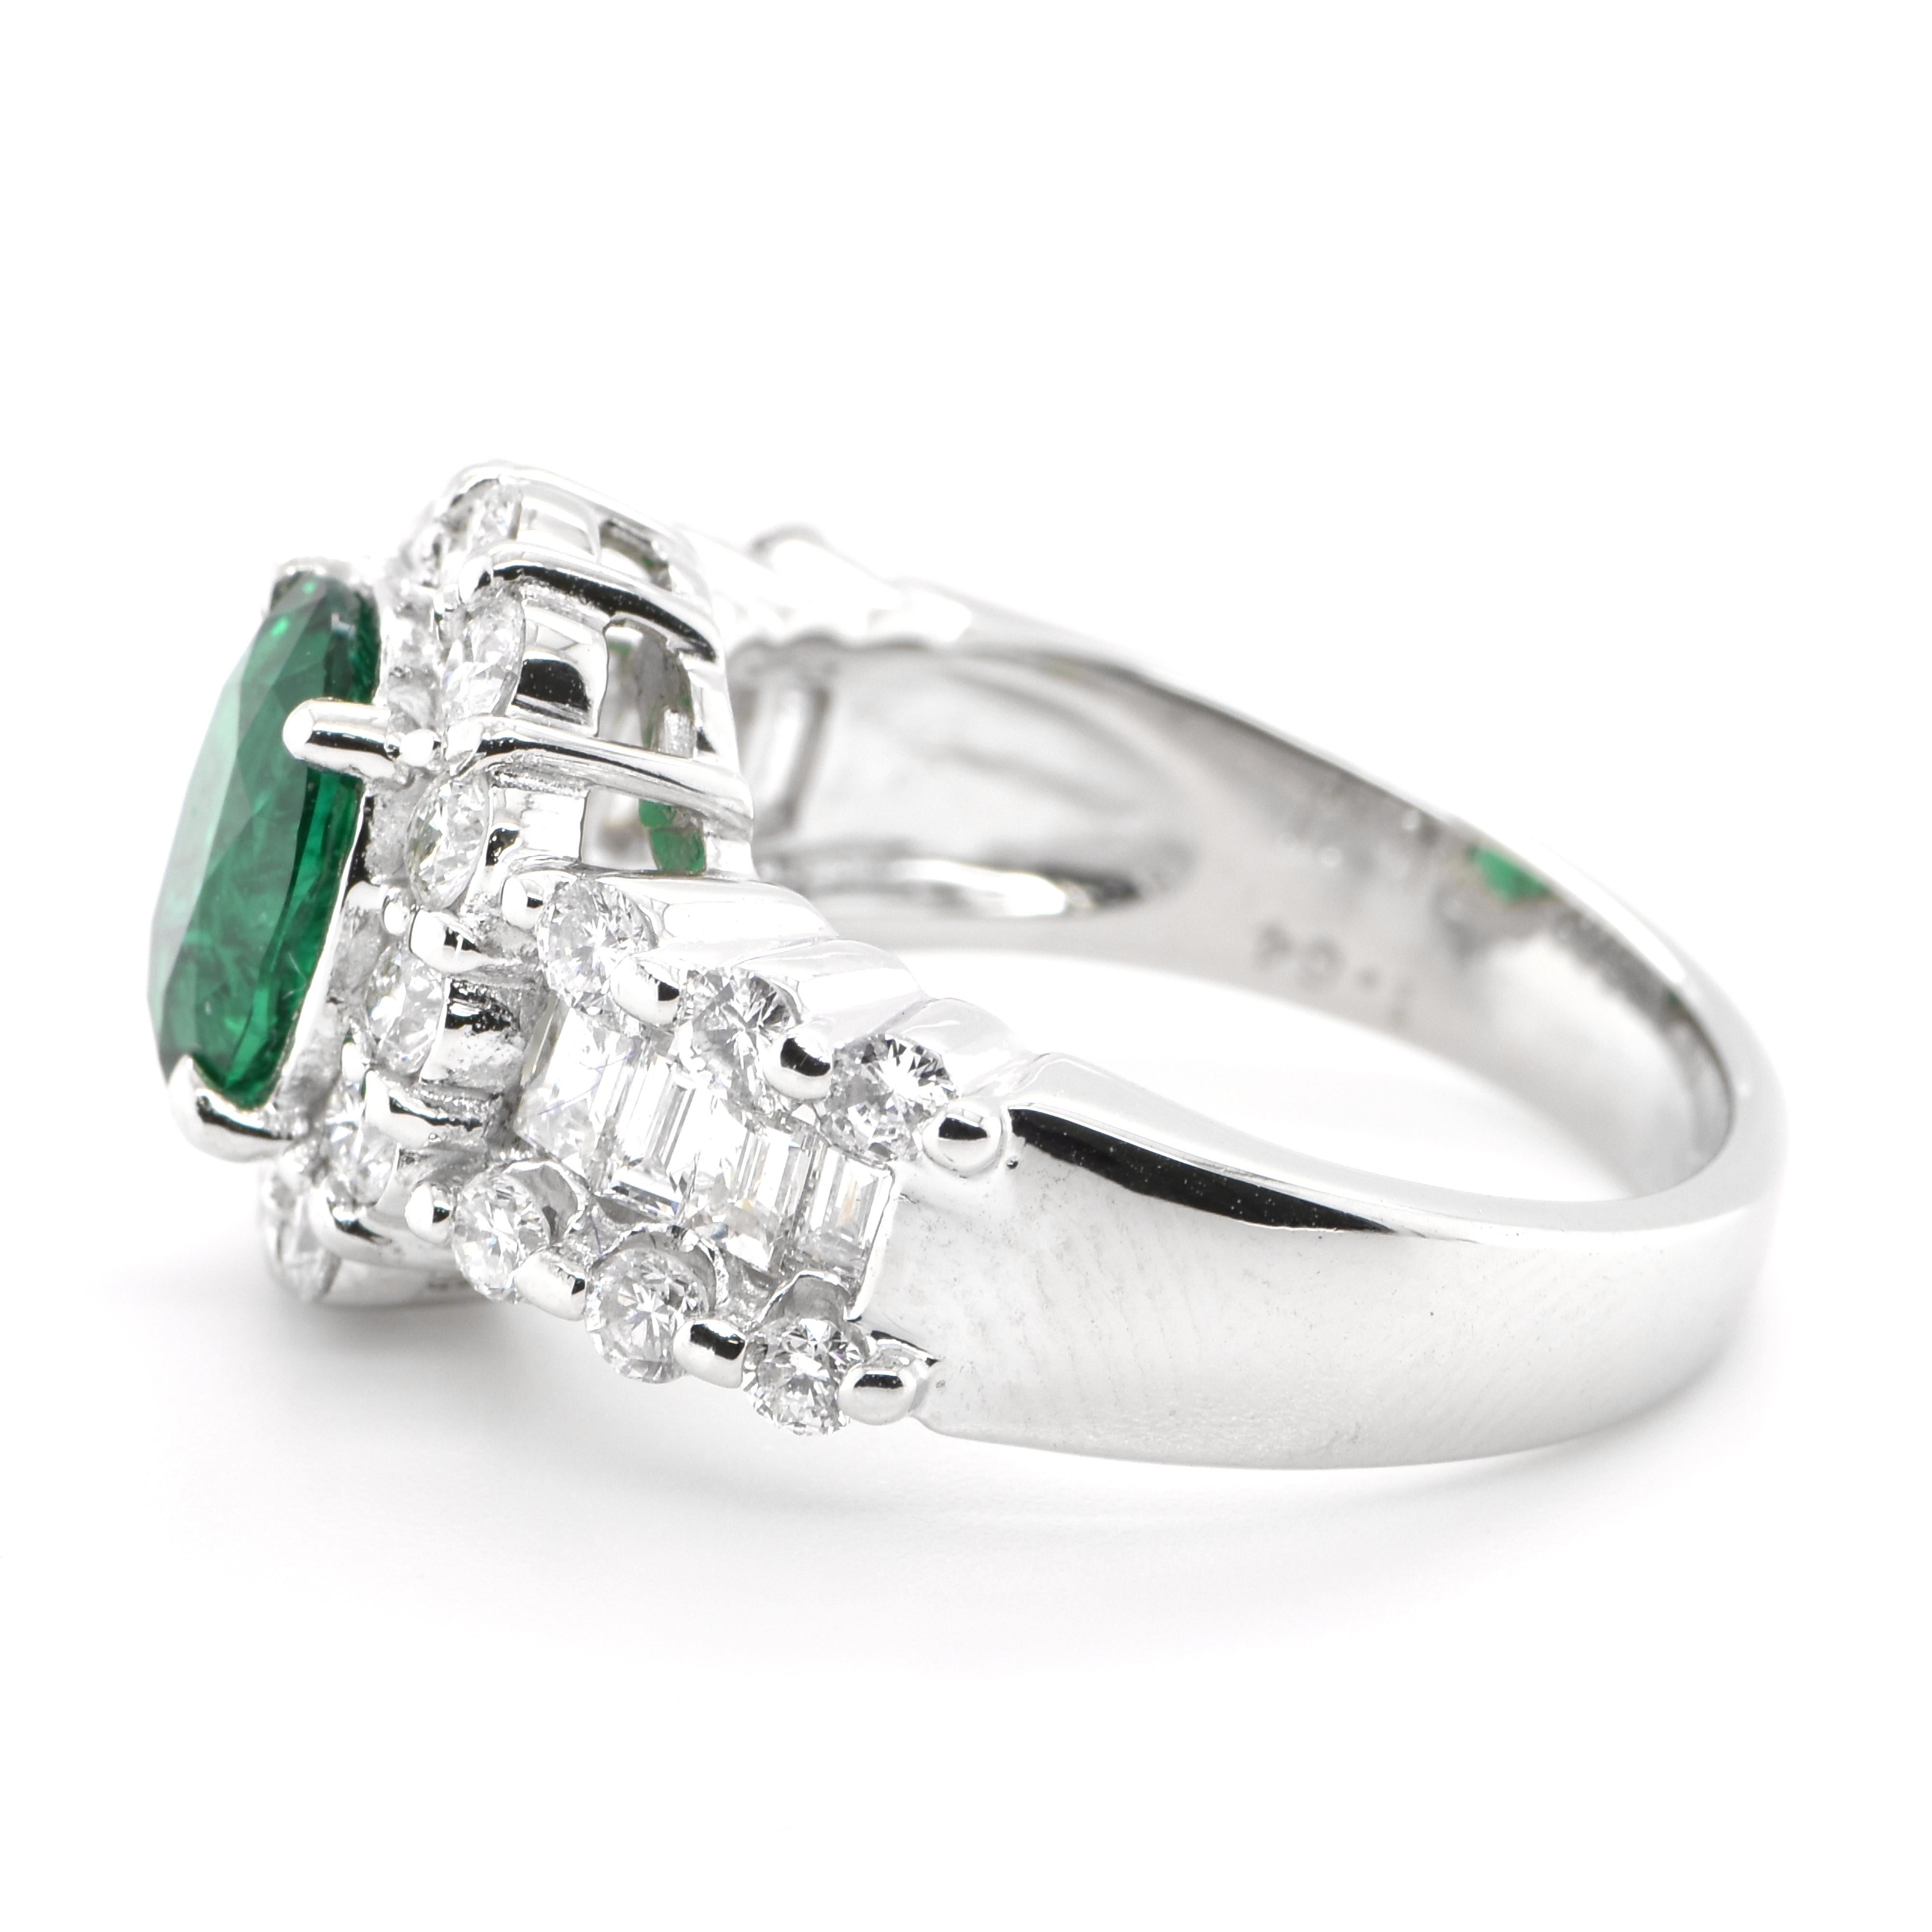 Oval Cut 1.64 Carat Natural Emerald and Diamond Halo Ring Set in Platinum